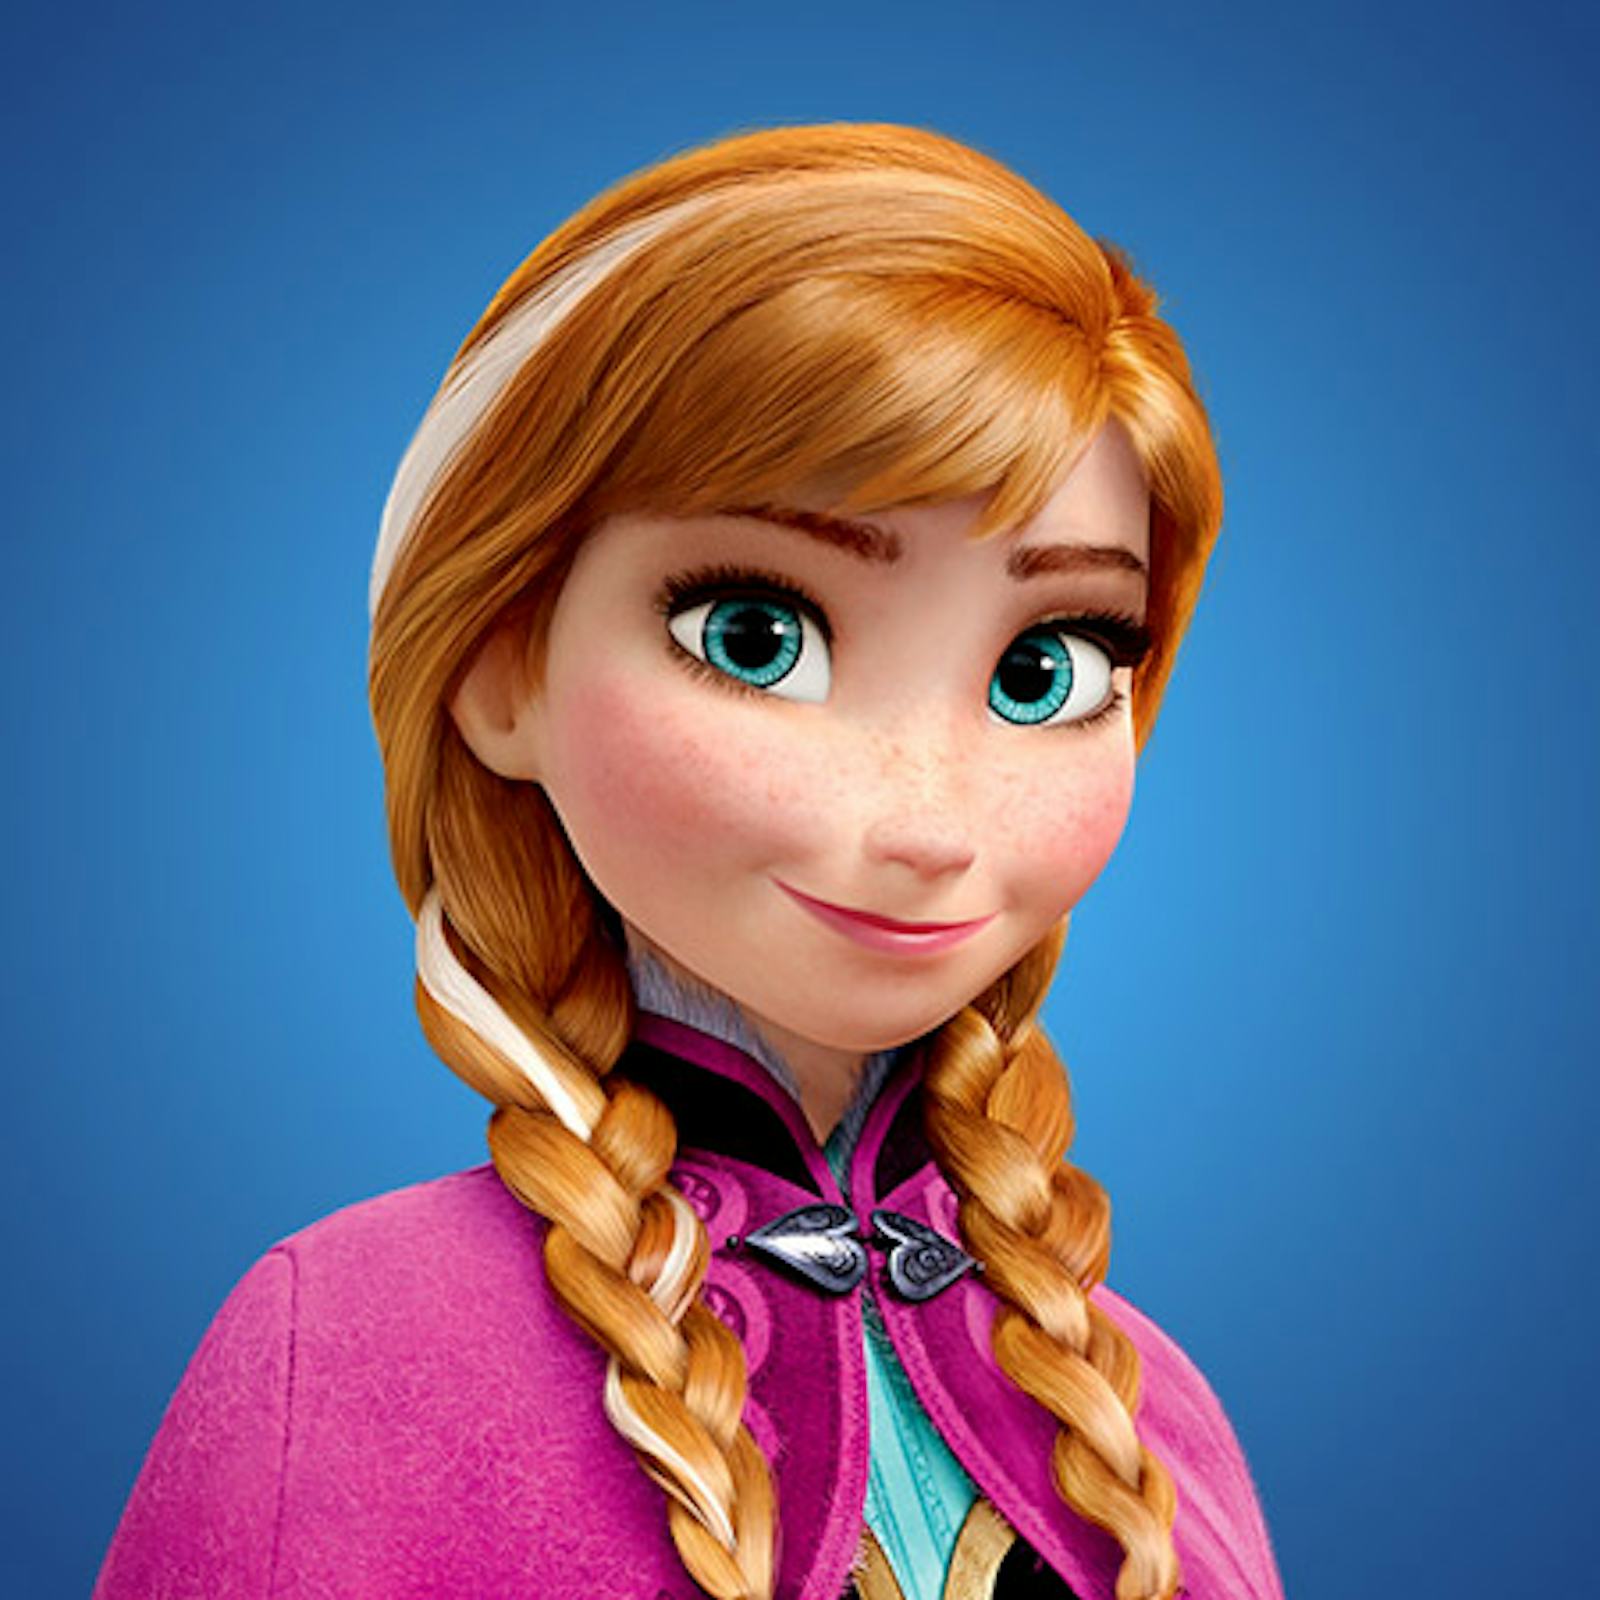 Frozen's Anna Is Someone We Can All Relate To.